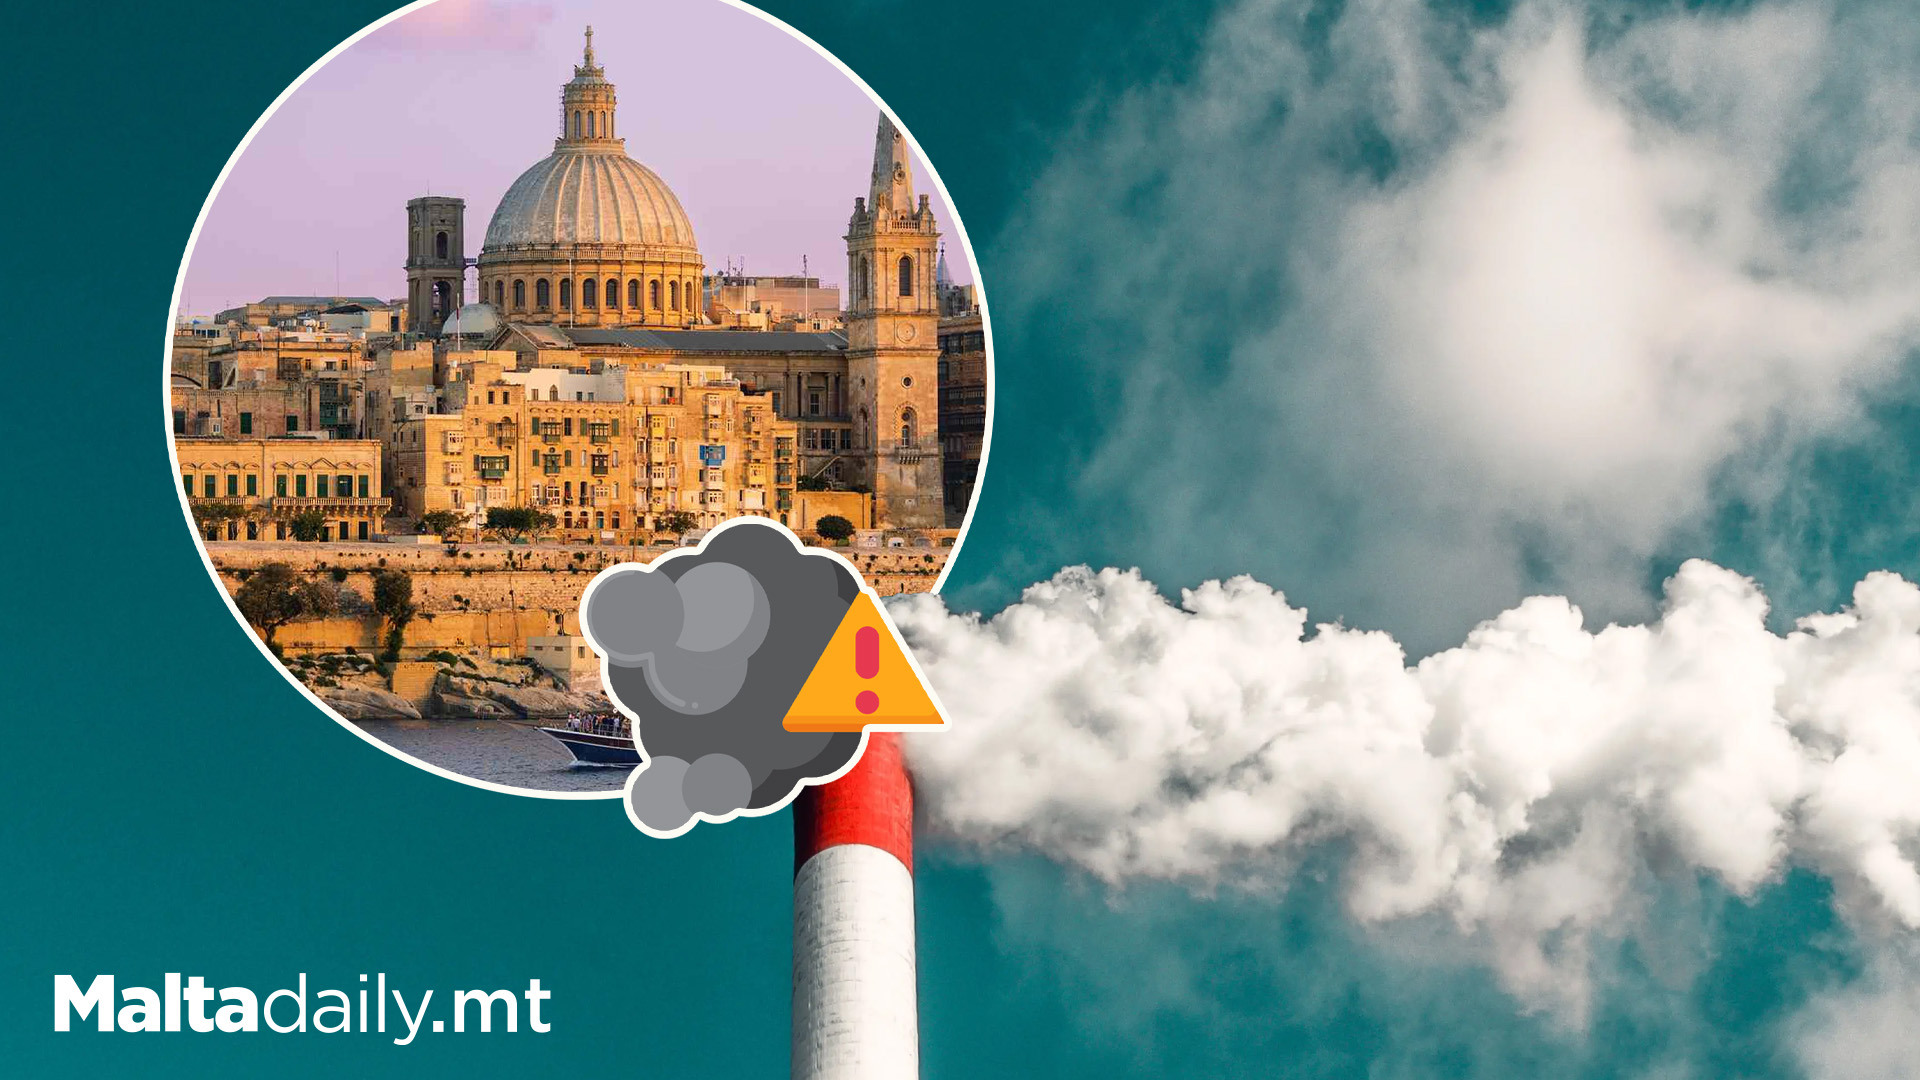 Malta's Air Polluted With Double The Recommended Amount